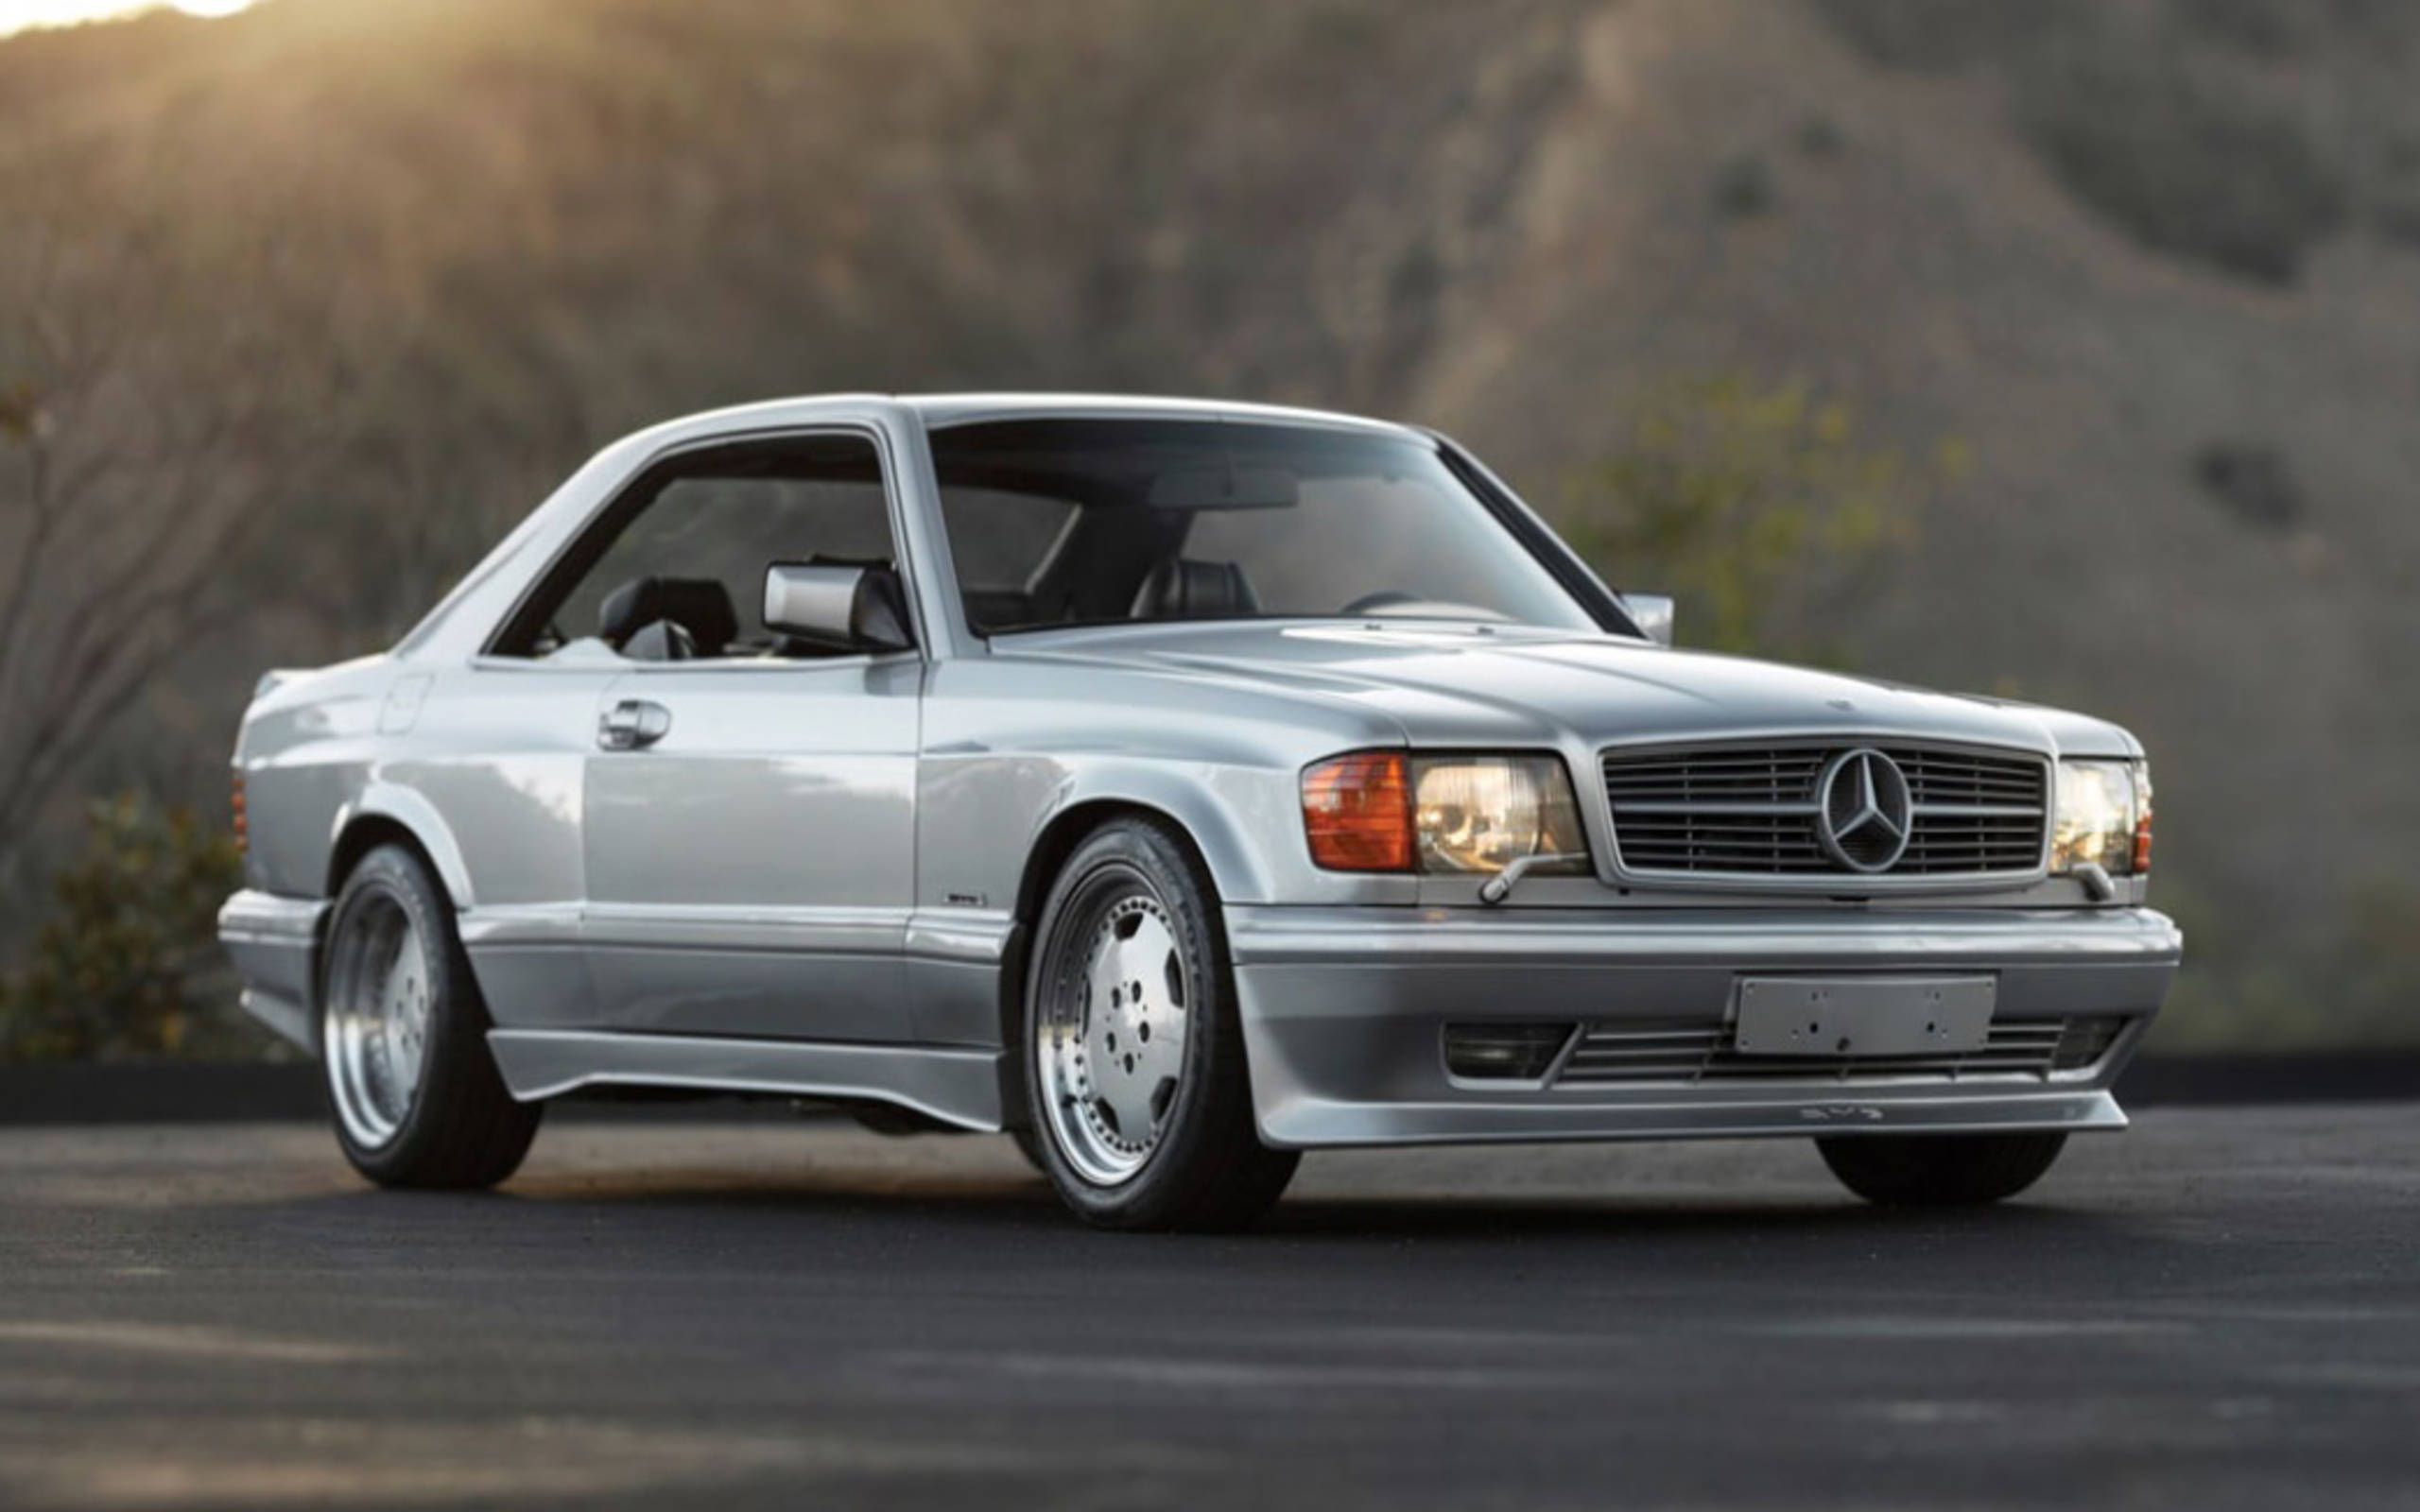 Big Bad Benz: 6.0 AMG SEC coupe heads to auction